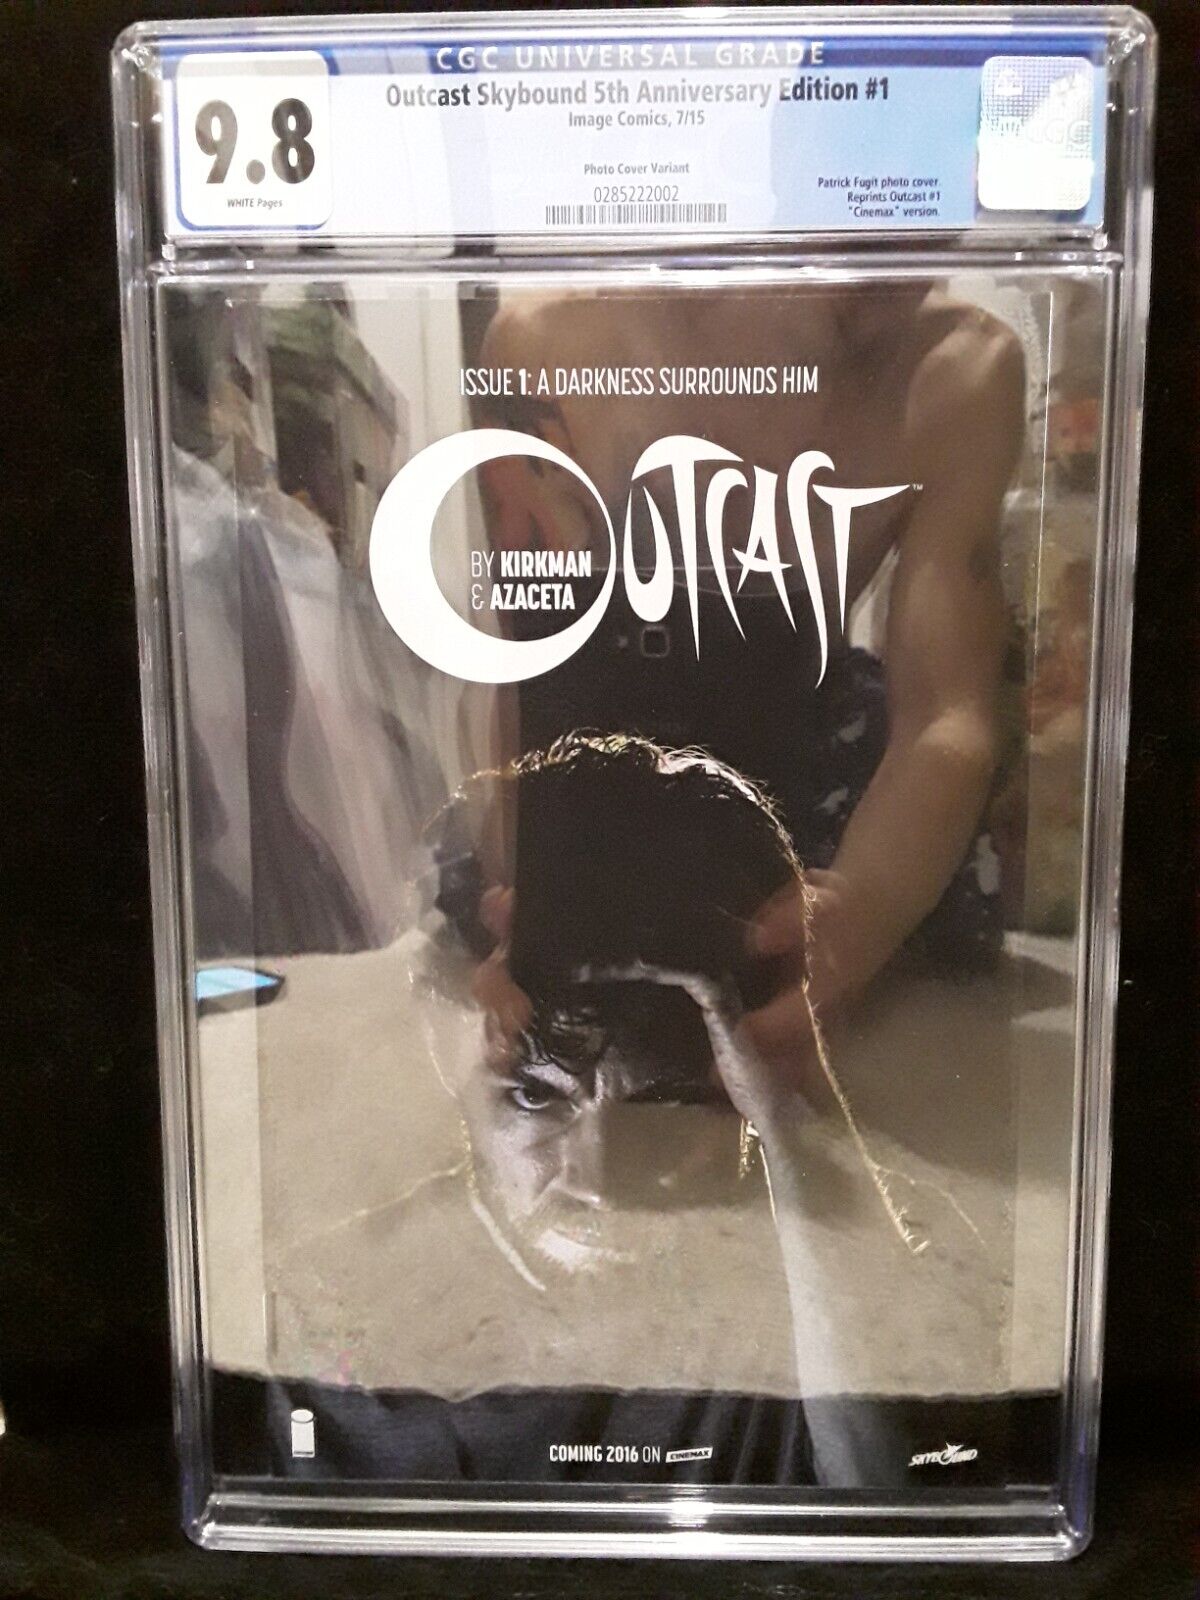 Outcast 1 9.8 CGC Skybound 5th Anniversary Edition Photo Cover Variant